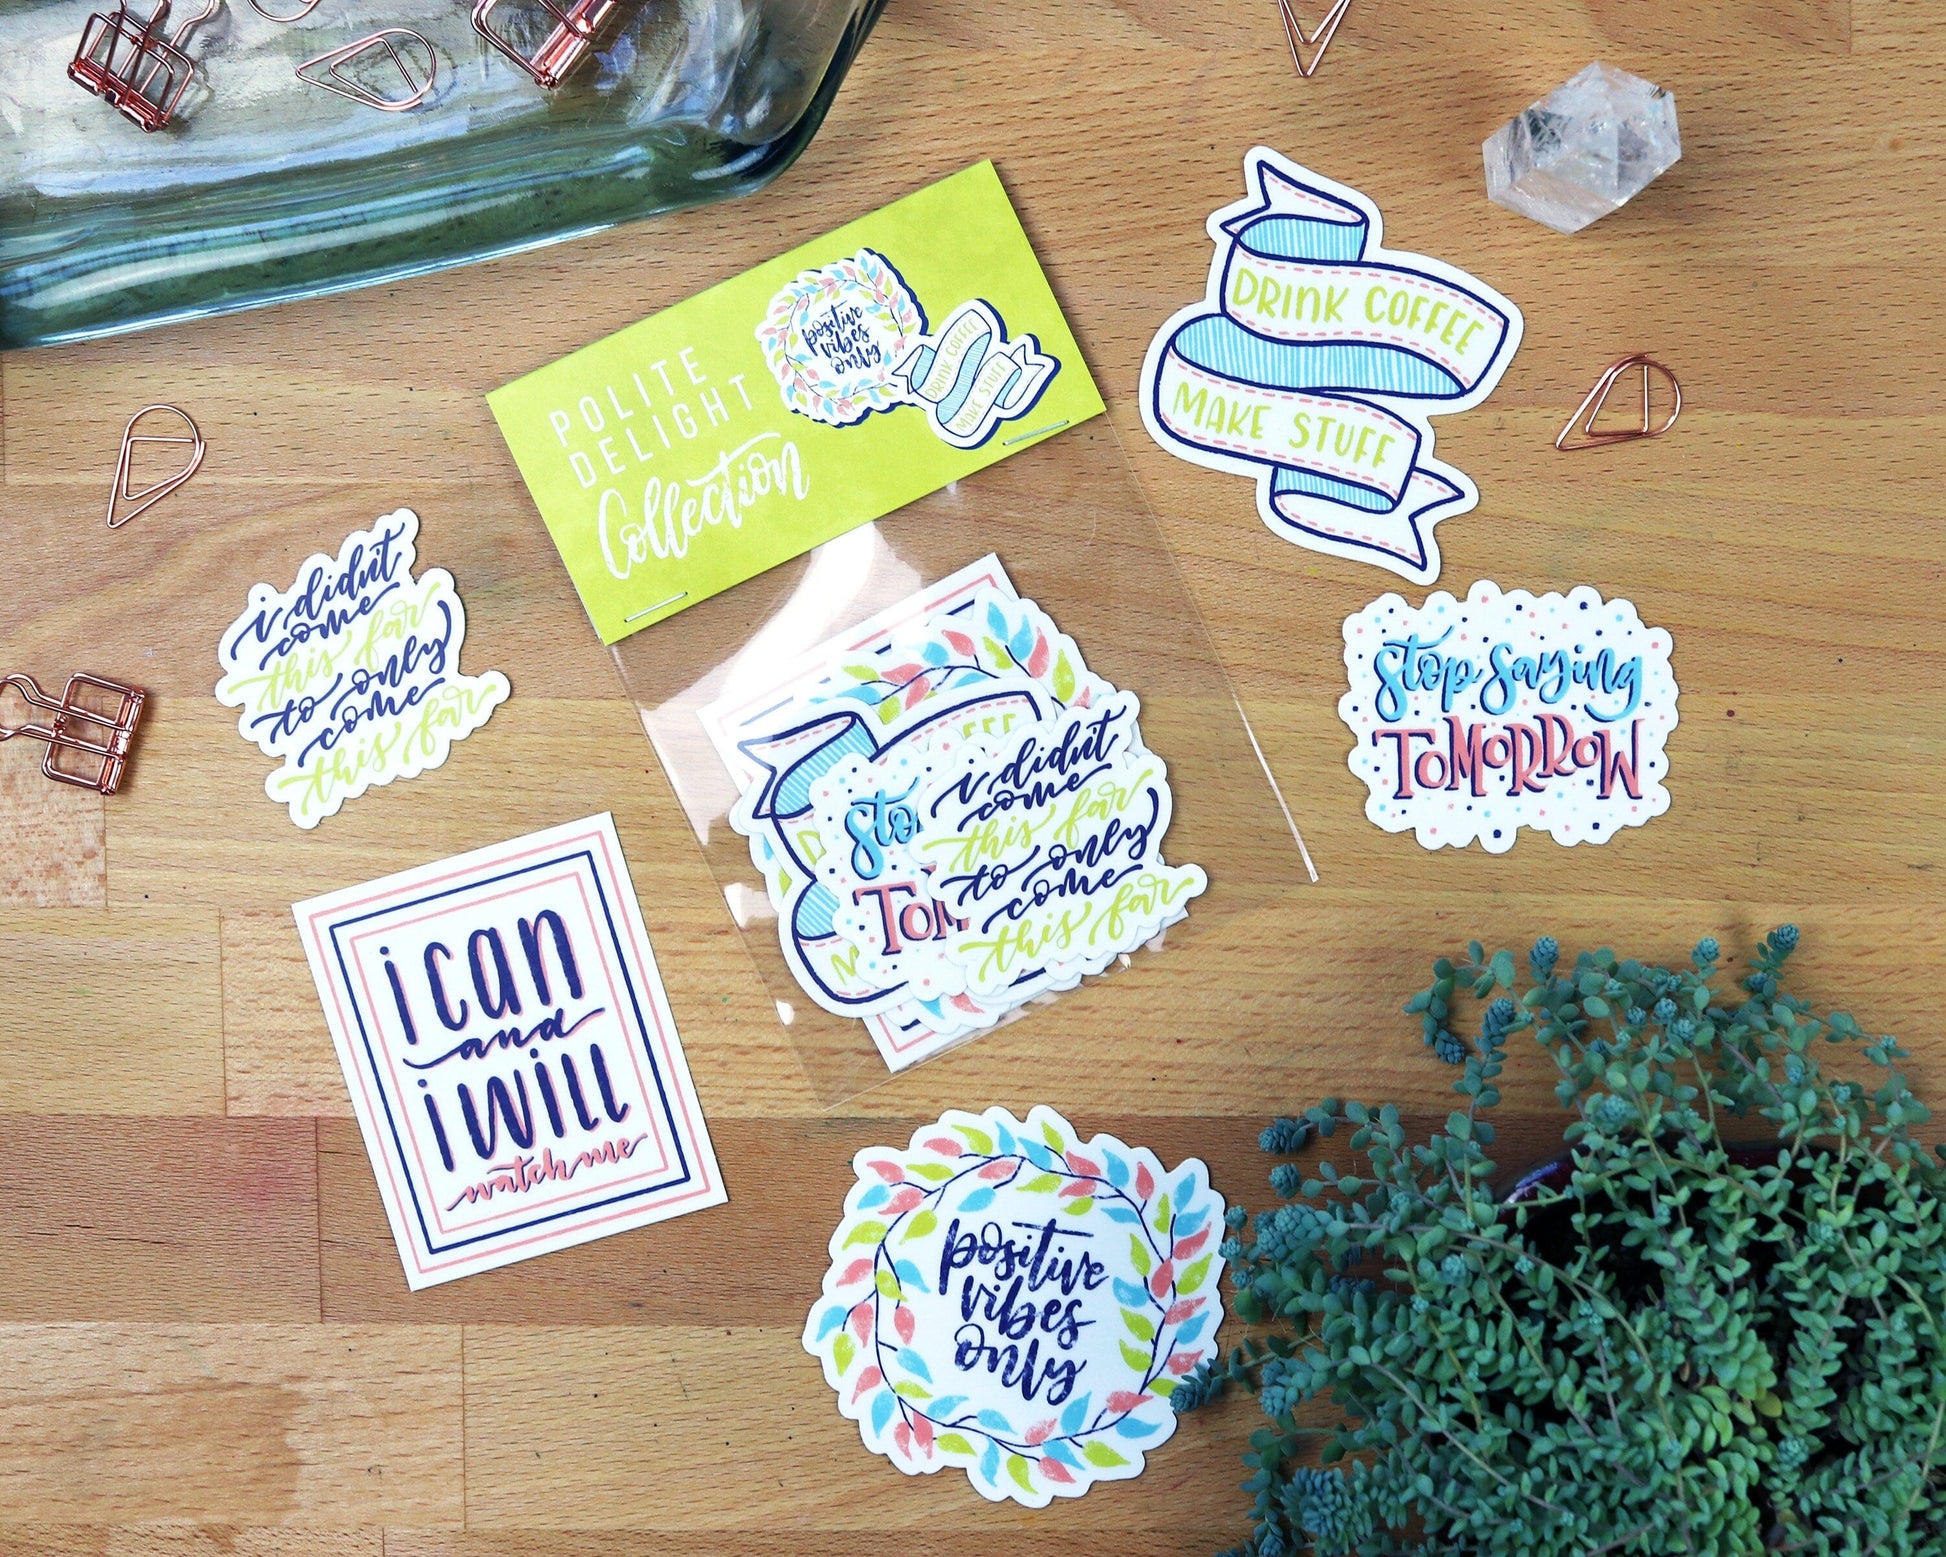 Polite Delight 5 Stickers Collection: Hand Lettered Die Cut Inspirational Quotes Bullet Journal Stickers Set for Journals Planners & Laptops